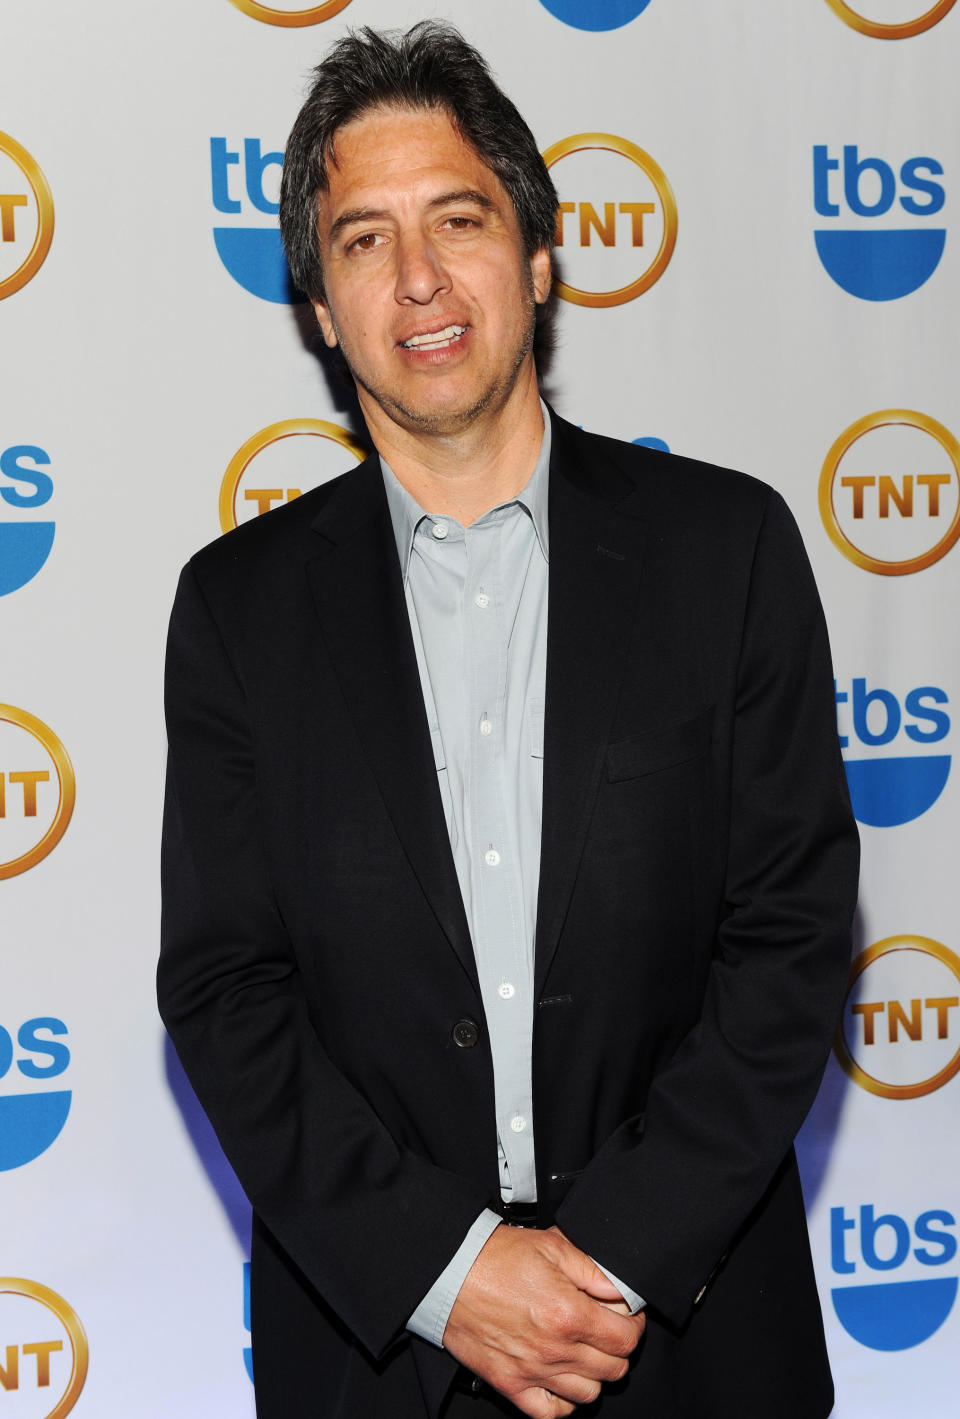 FILE- In this May 19, 2010 file photo, Actor Ray Romano attends the TNT and TBS Upfront presentation at the Hammerstein Ballroom, in New York. The "Everybody Loves Raymond Star" is feeling the love in a multi-episode arc on the NBC series, "Parenthood." Romano told the AP Tuesday, Jan. 8, 2013, that he recently shot his last episode of season four, and if it gets picked up for a fifth, he’d consider coming back. (AP Photo/Evan Agostini, file)